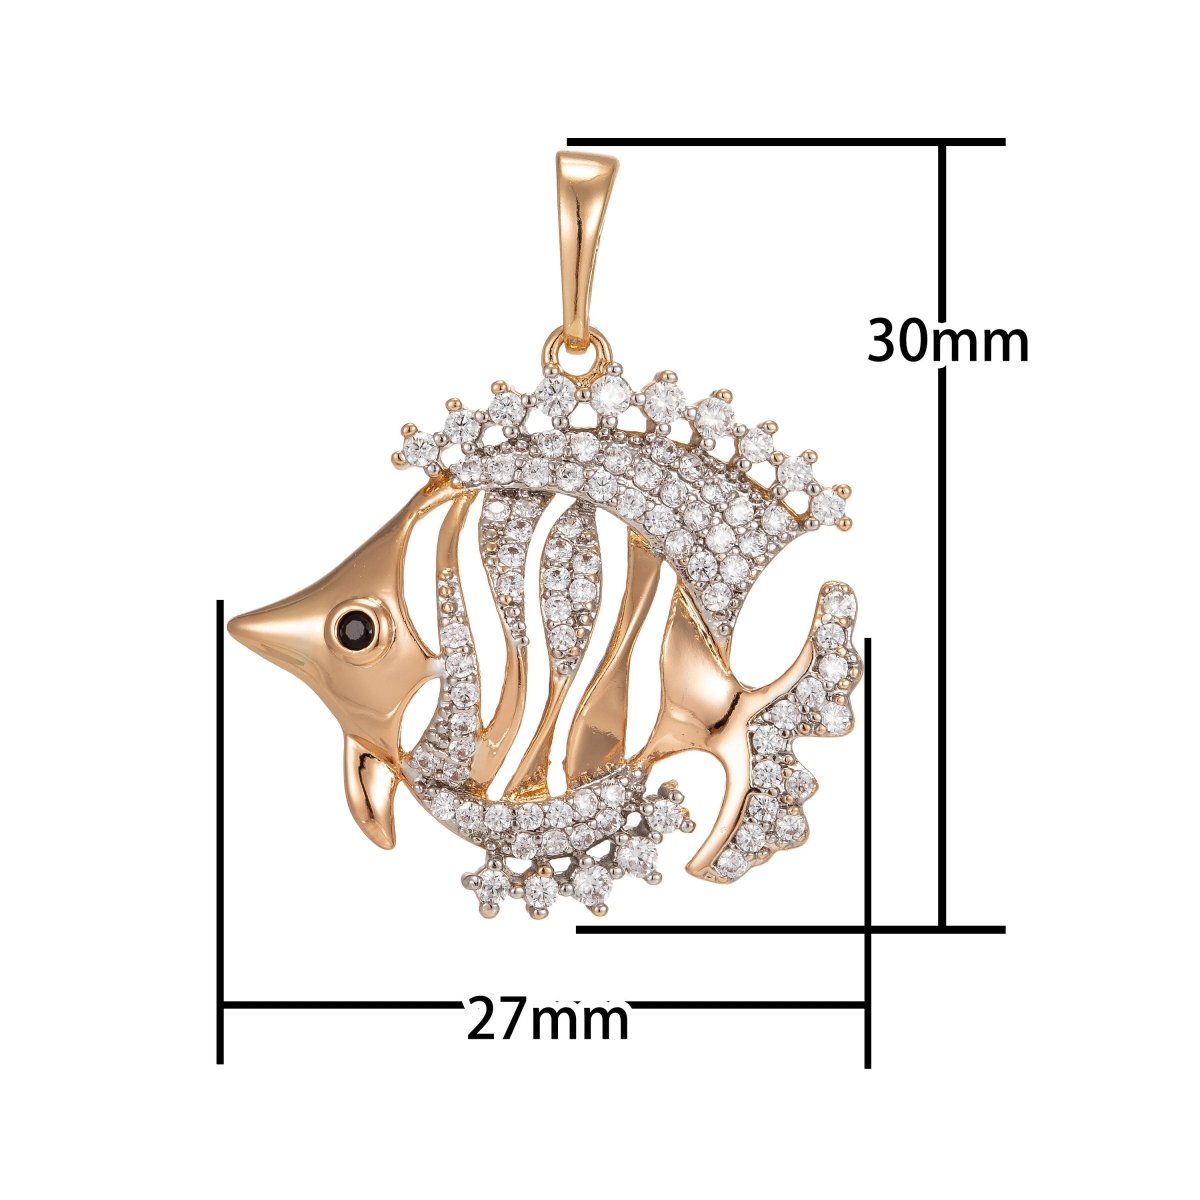 Micro Pave Clown Fish Pendant in 18K Gold Filled Charm Cubic Fish Charm Animal Pendant Jewelry for Necklace Component I-253 - DLUXCA